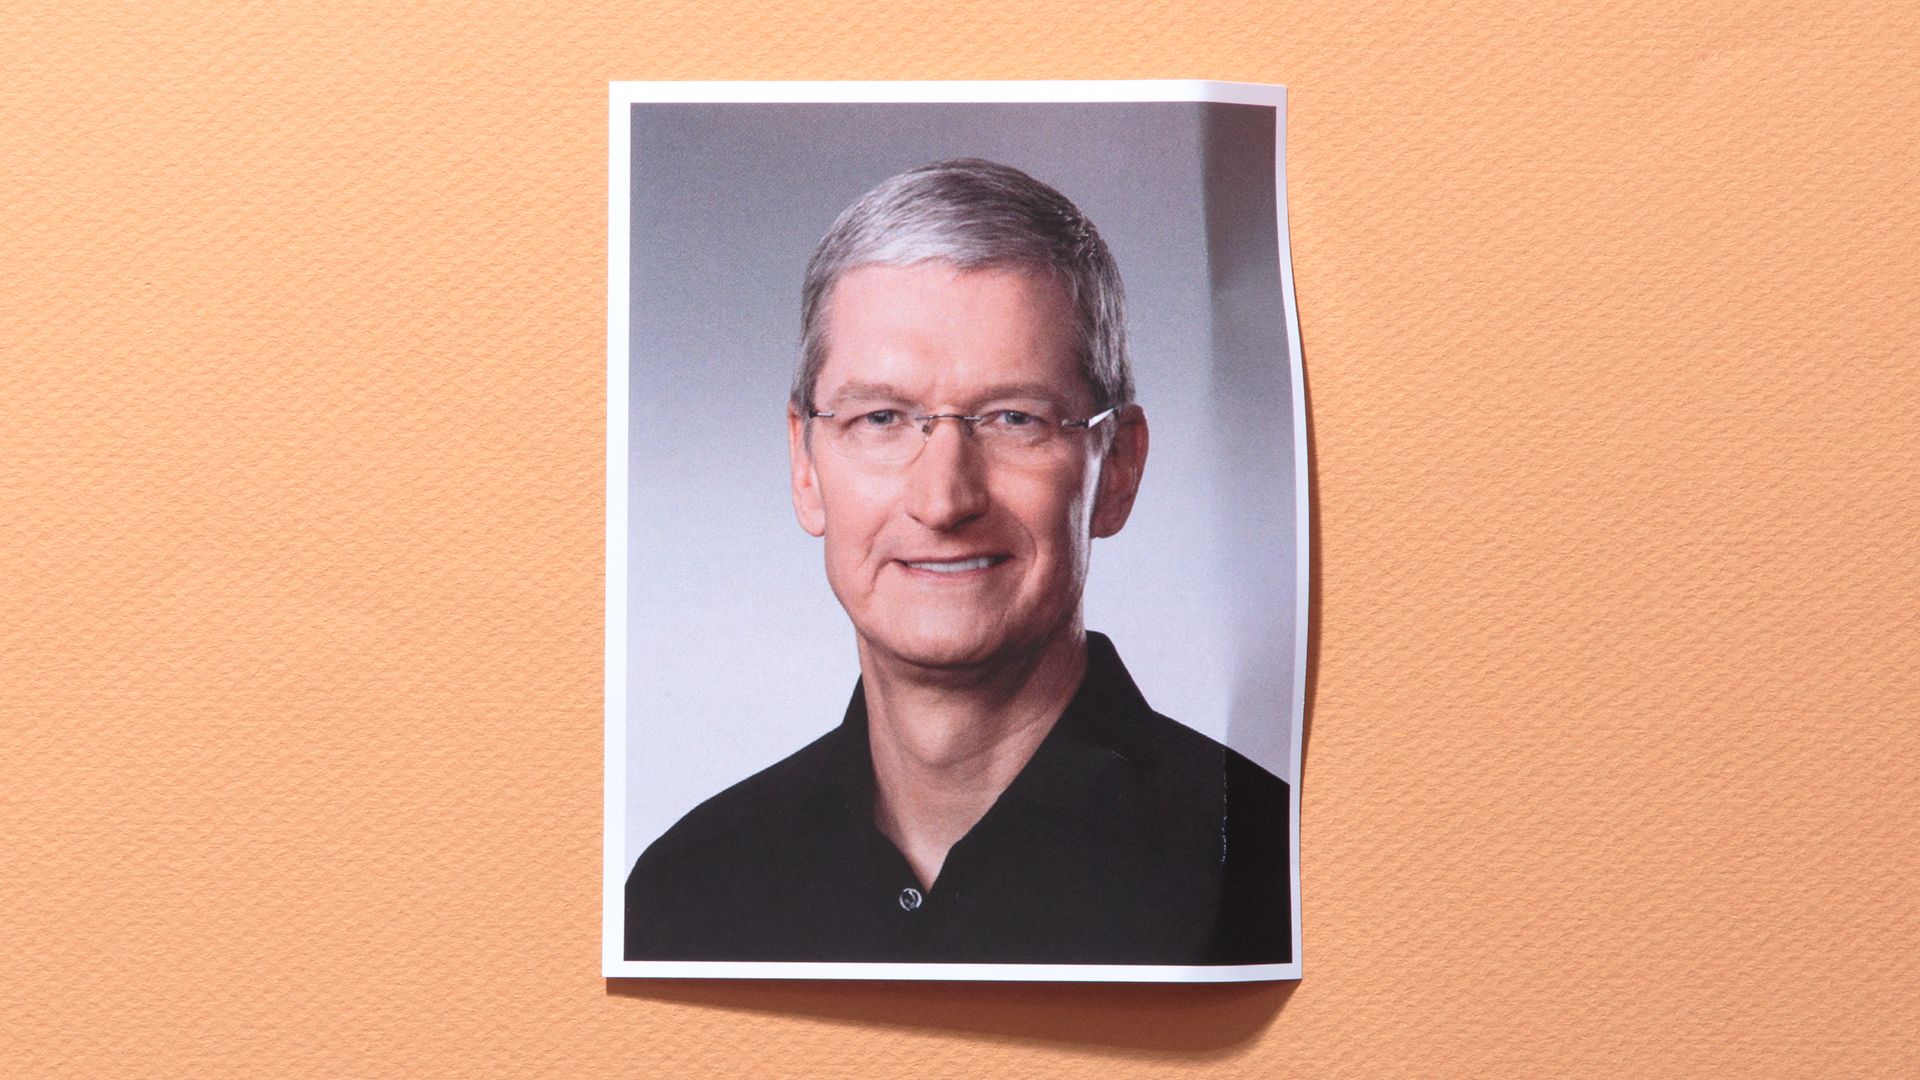 Meet Tim Cook, one of Fast Company's Most Creative People. Fast